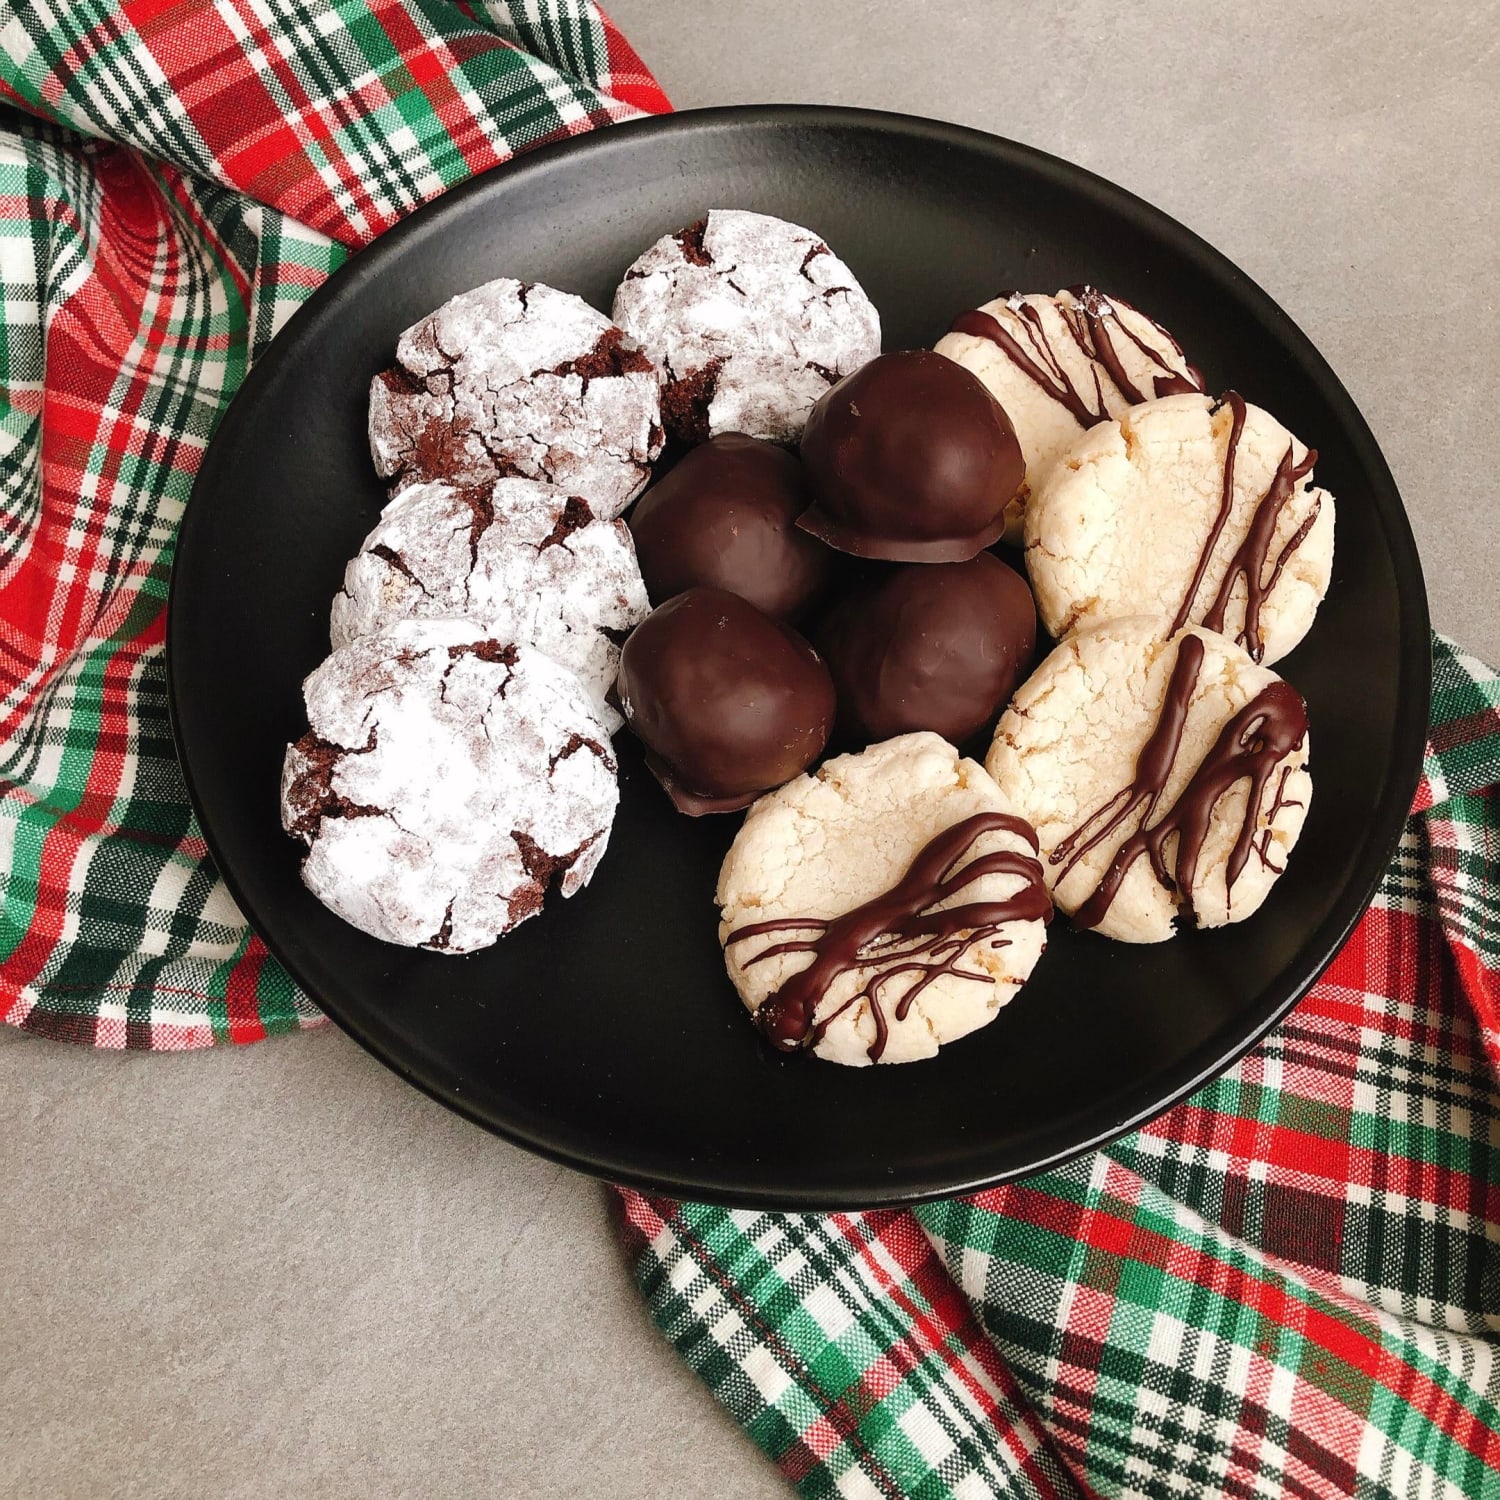 Tried to make some of my grandma’s classic Christmas goodies vegan and gluten free!! I present to you chocolate crinkle cookies, chocolate peanut butter balls, and shortbread cookies ☺️ hope I did her proud!